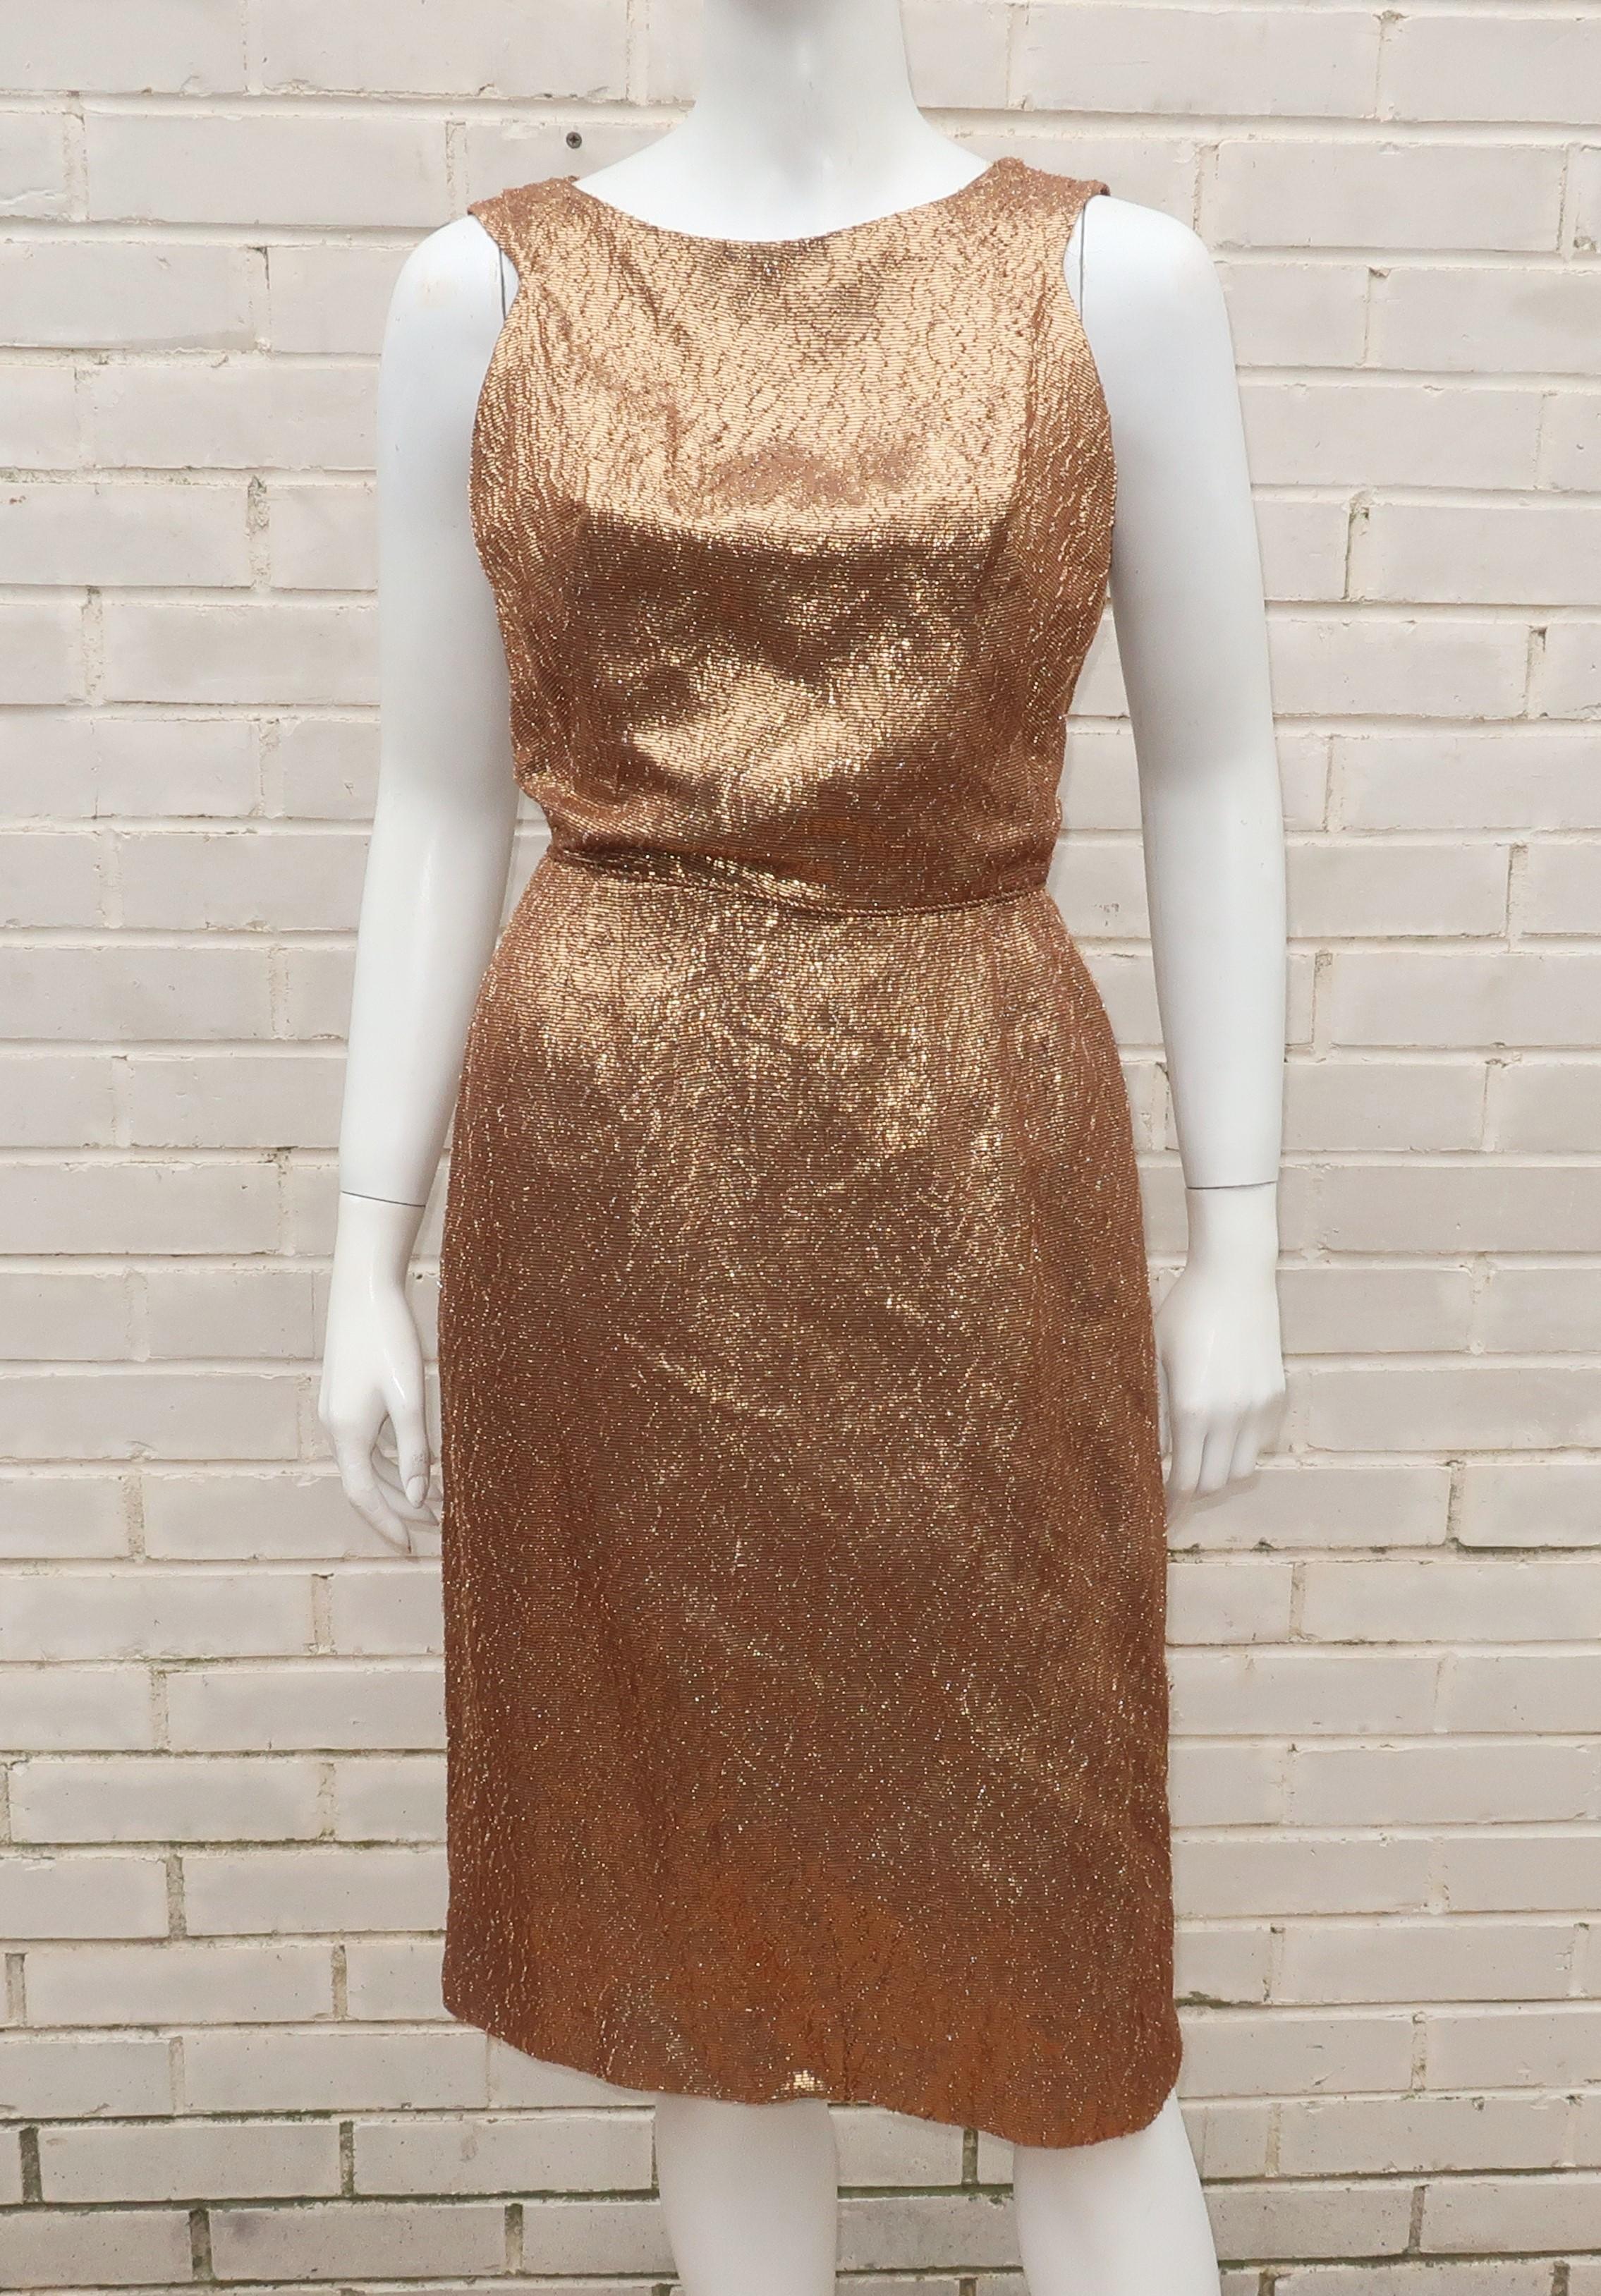 1950's bronzed gold textured lamé wiggle dress with a sassy cut out design at the back accented by bows.  The sleeveless silhouette zips, hooks and snaps at the back with a cord detail at the waistline.  Fully lined in a brown acetate.  No designer